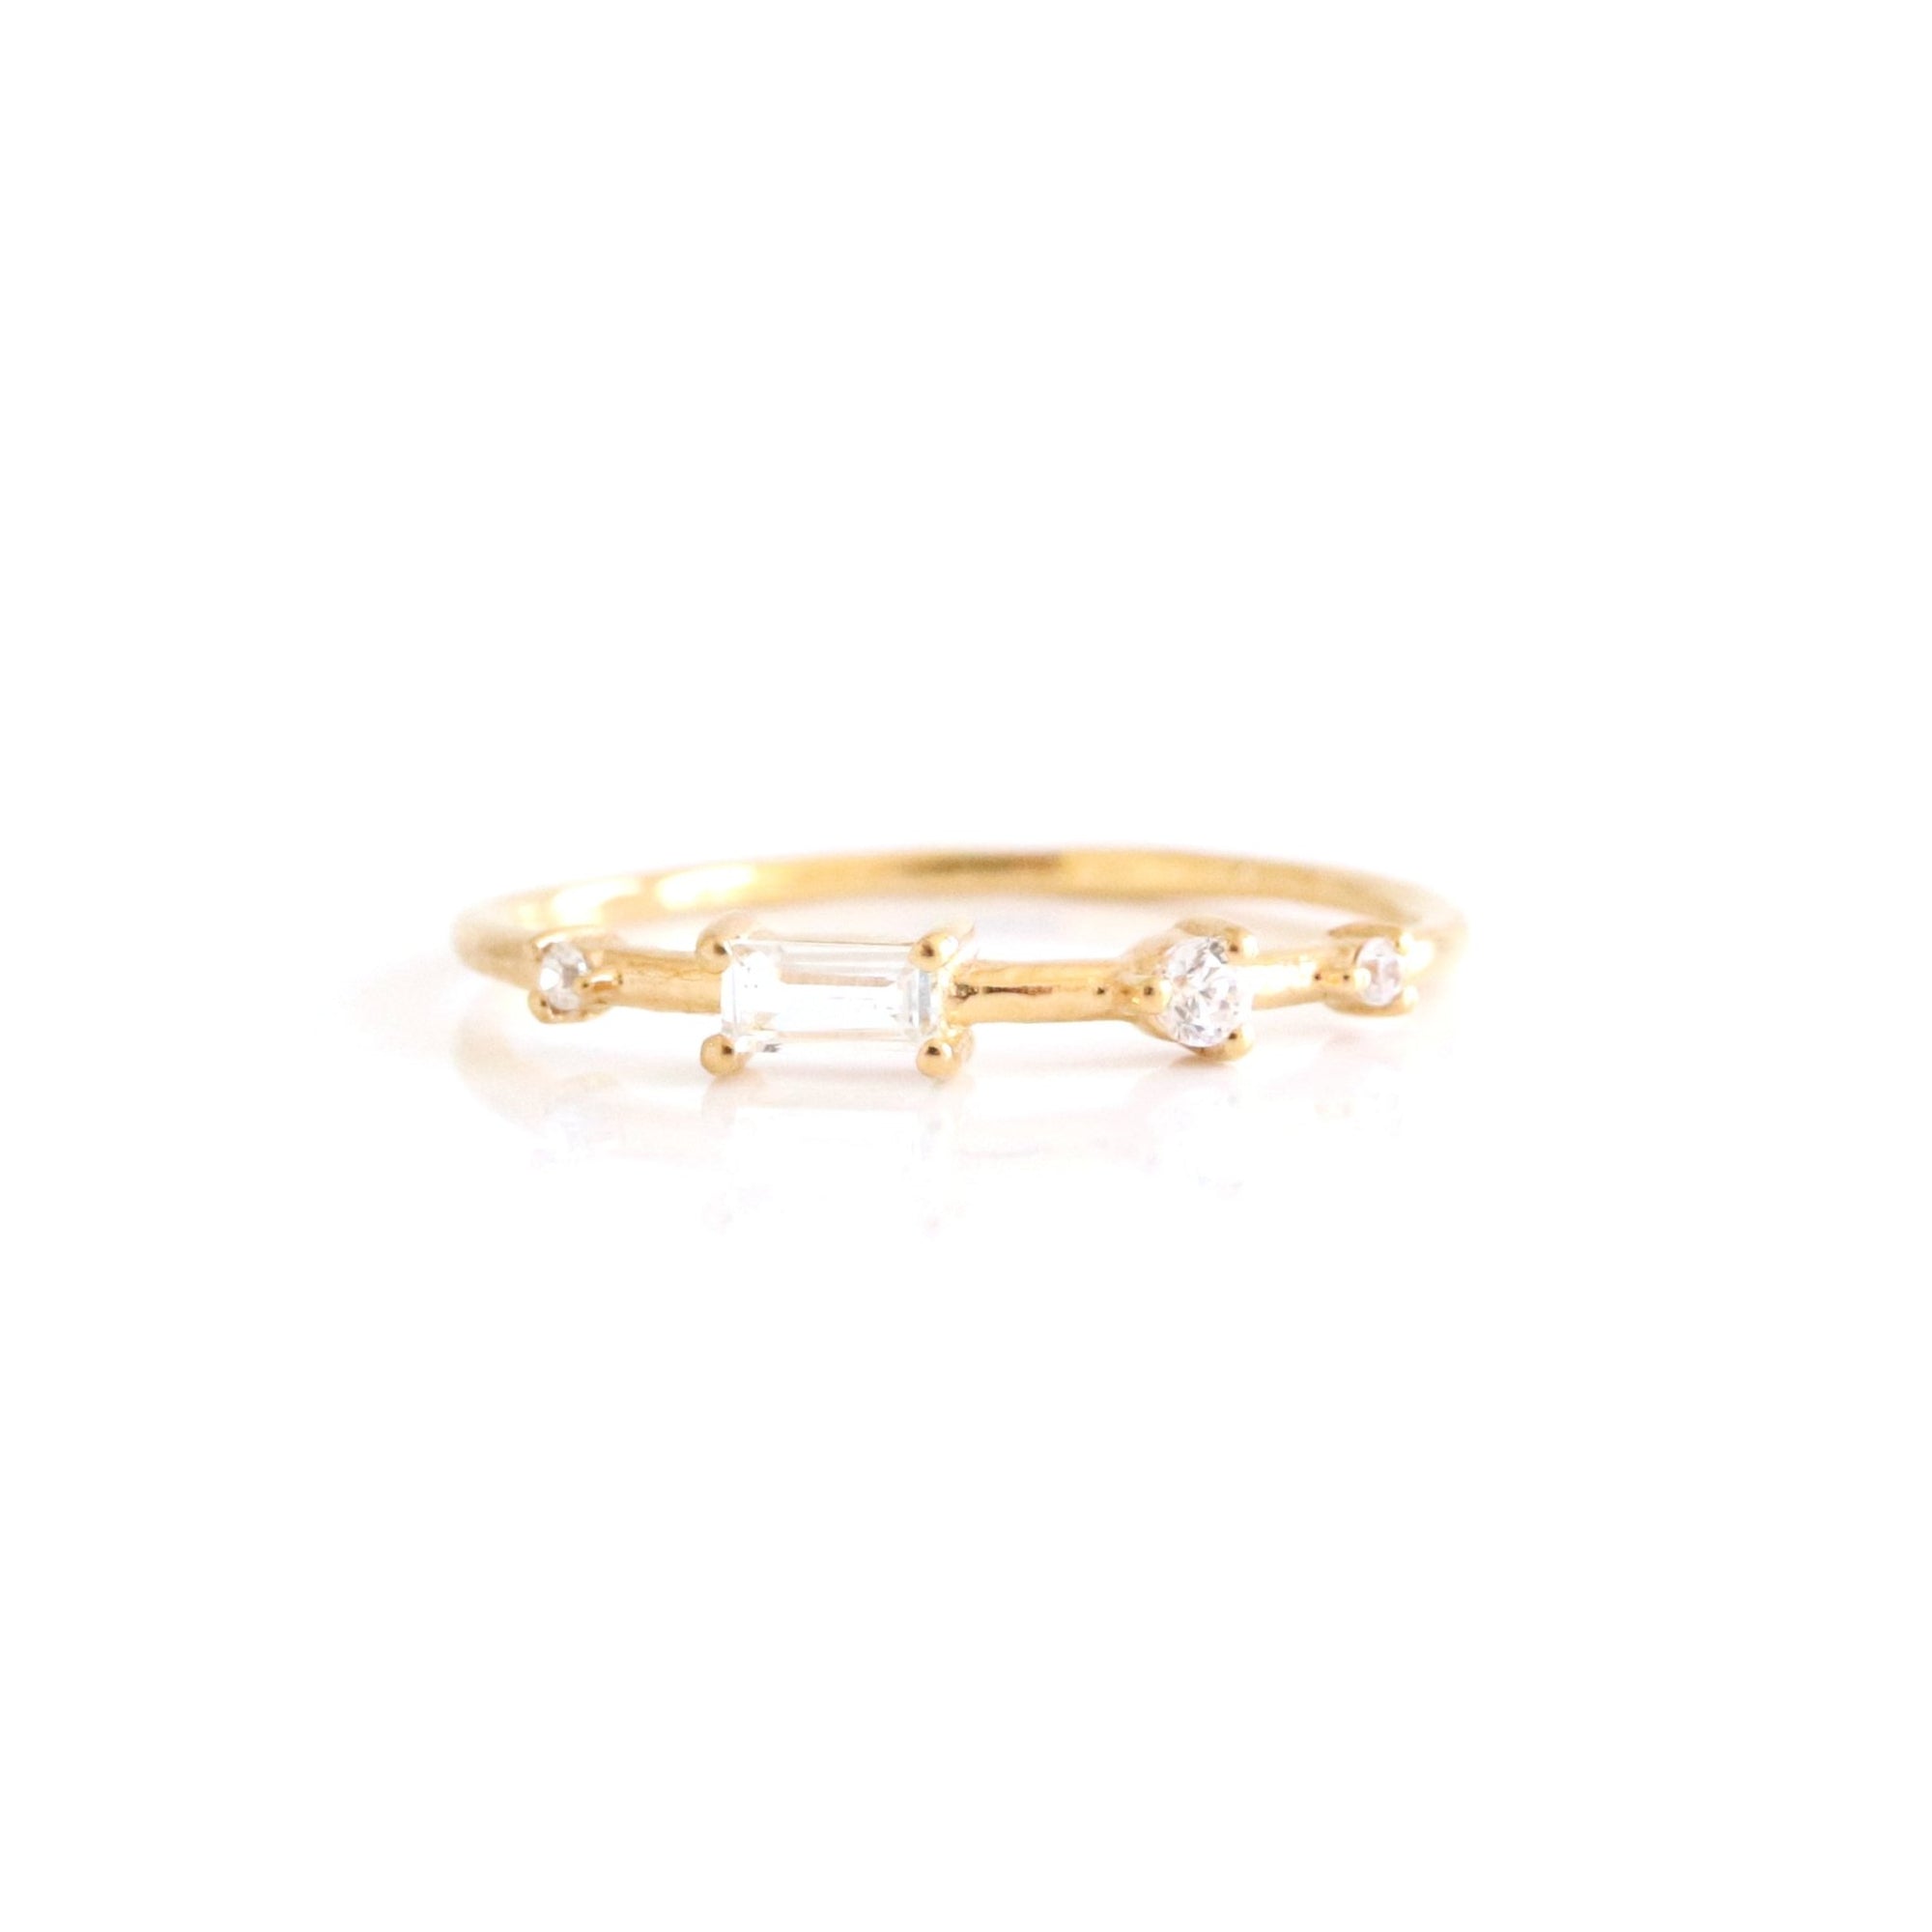 Loyal Dancing Stacking Ring - White Topaz, Cubic Zirconia & Gold - SO PRETTY CARA COTTER